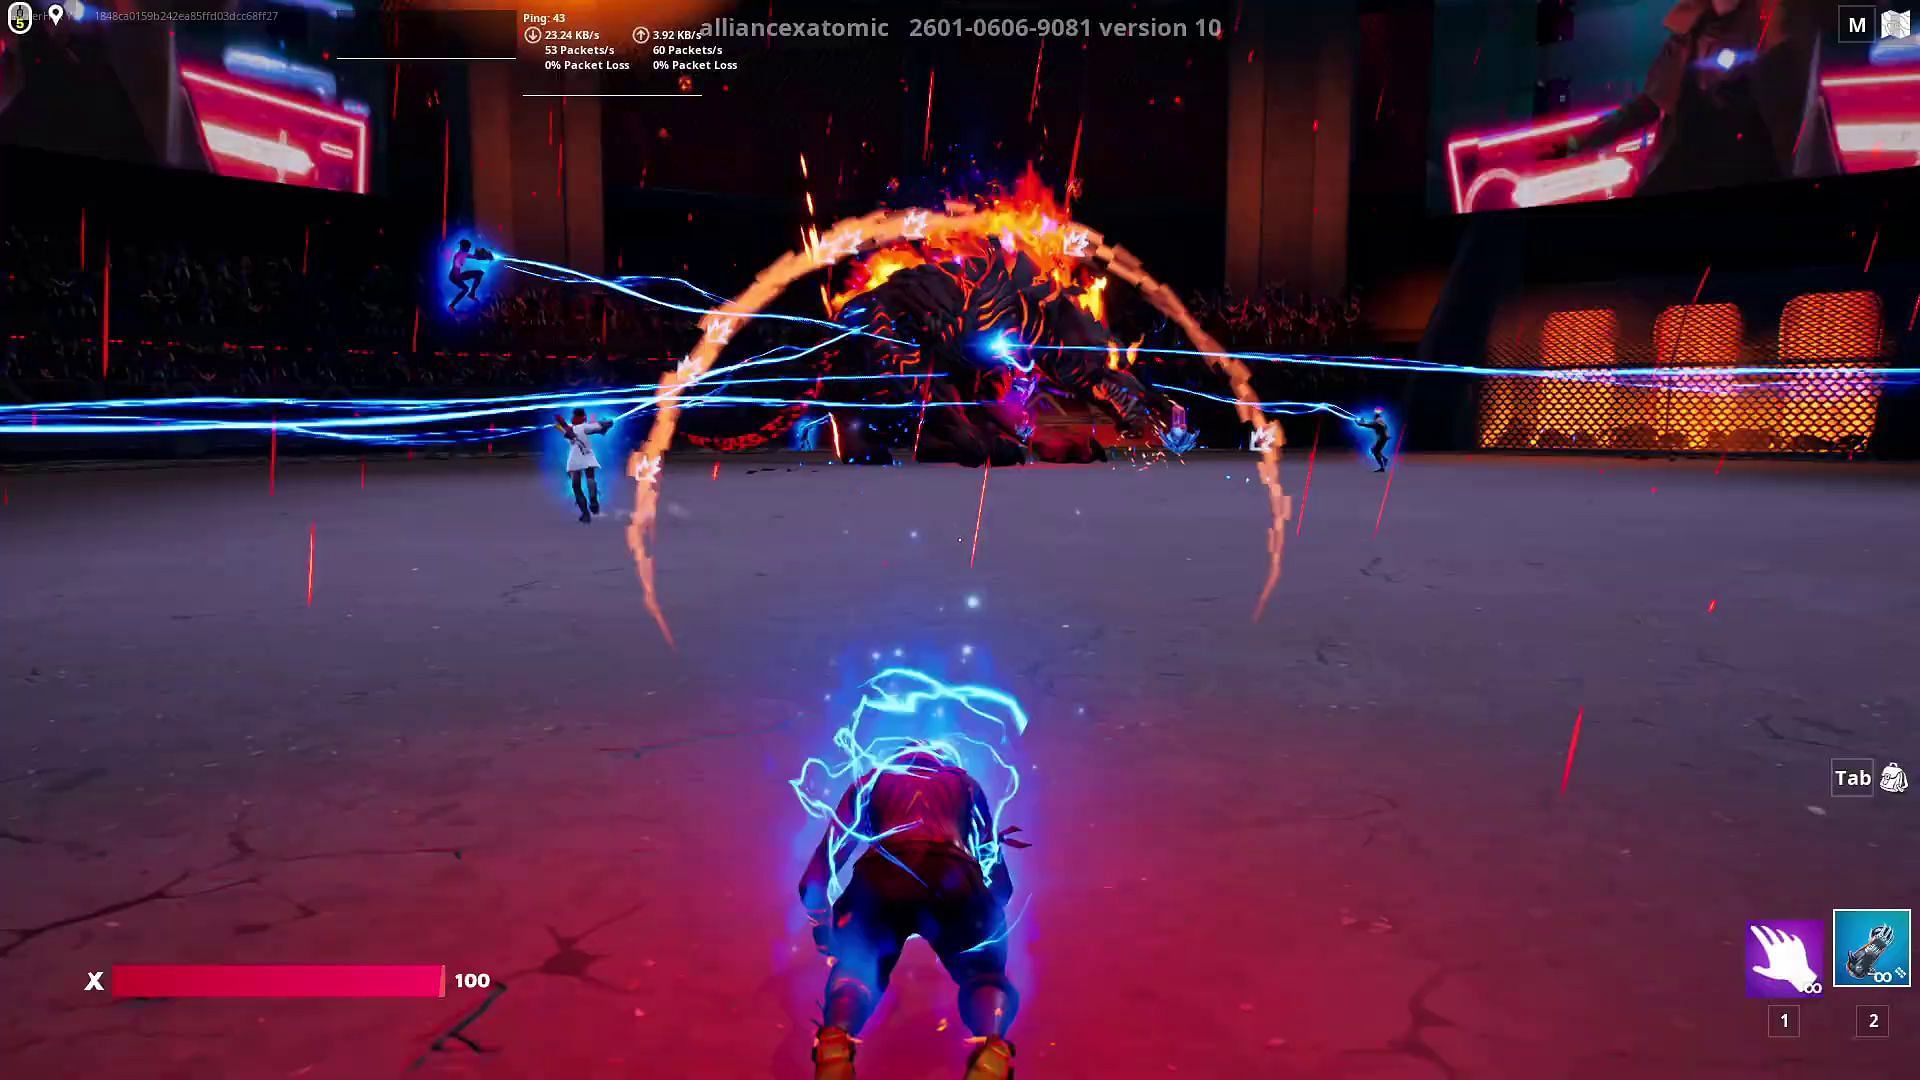 Auto Revive sequence will shortly generate in case you get knocked down (Image via YouTube/FortniteEvents)